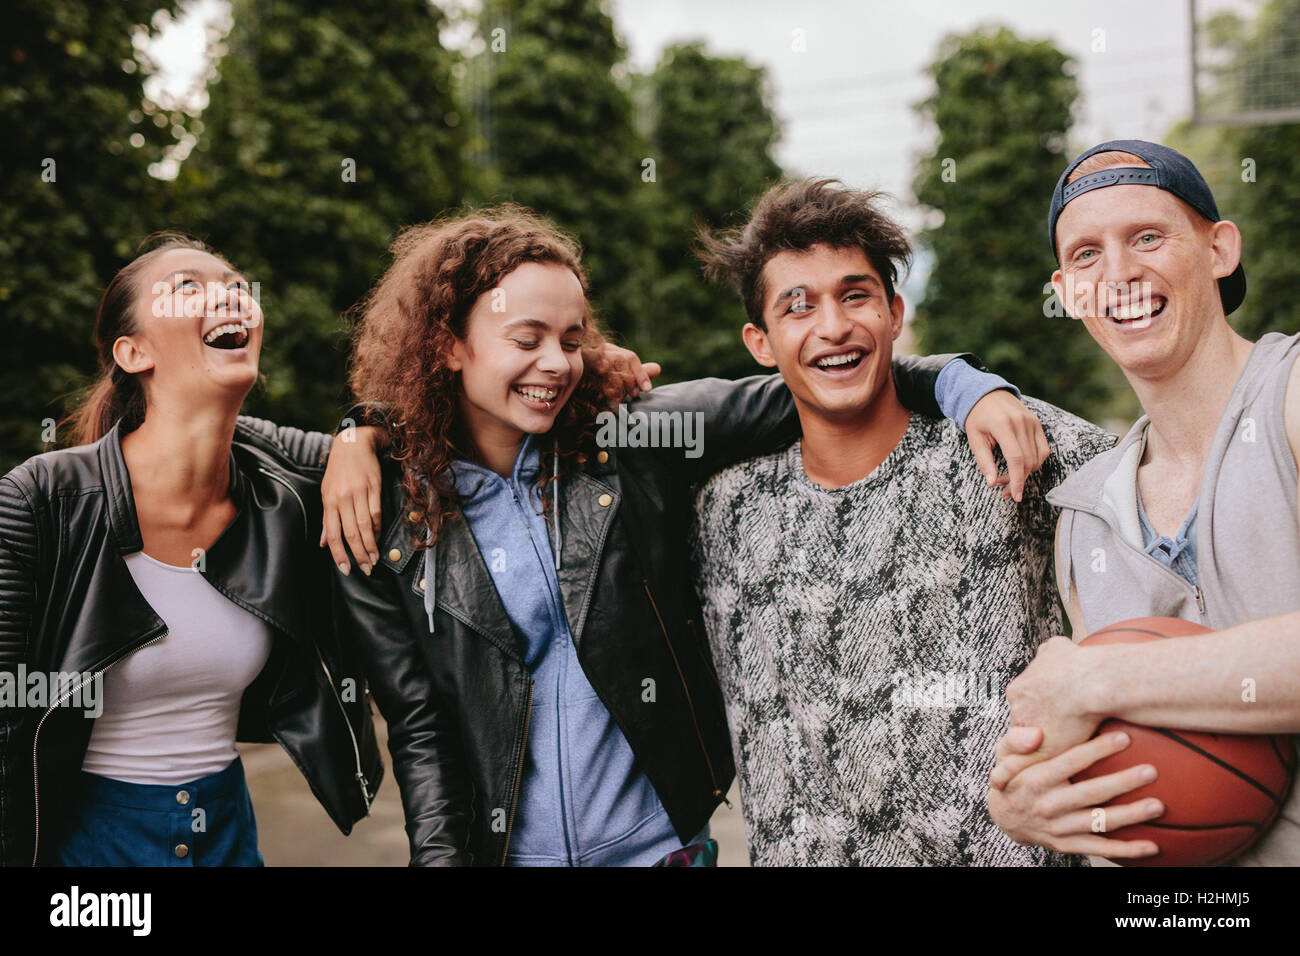 Portrait of four young friends smiling together. Mixed race group of people enjoying outdoors. Stock Photo